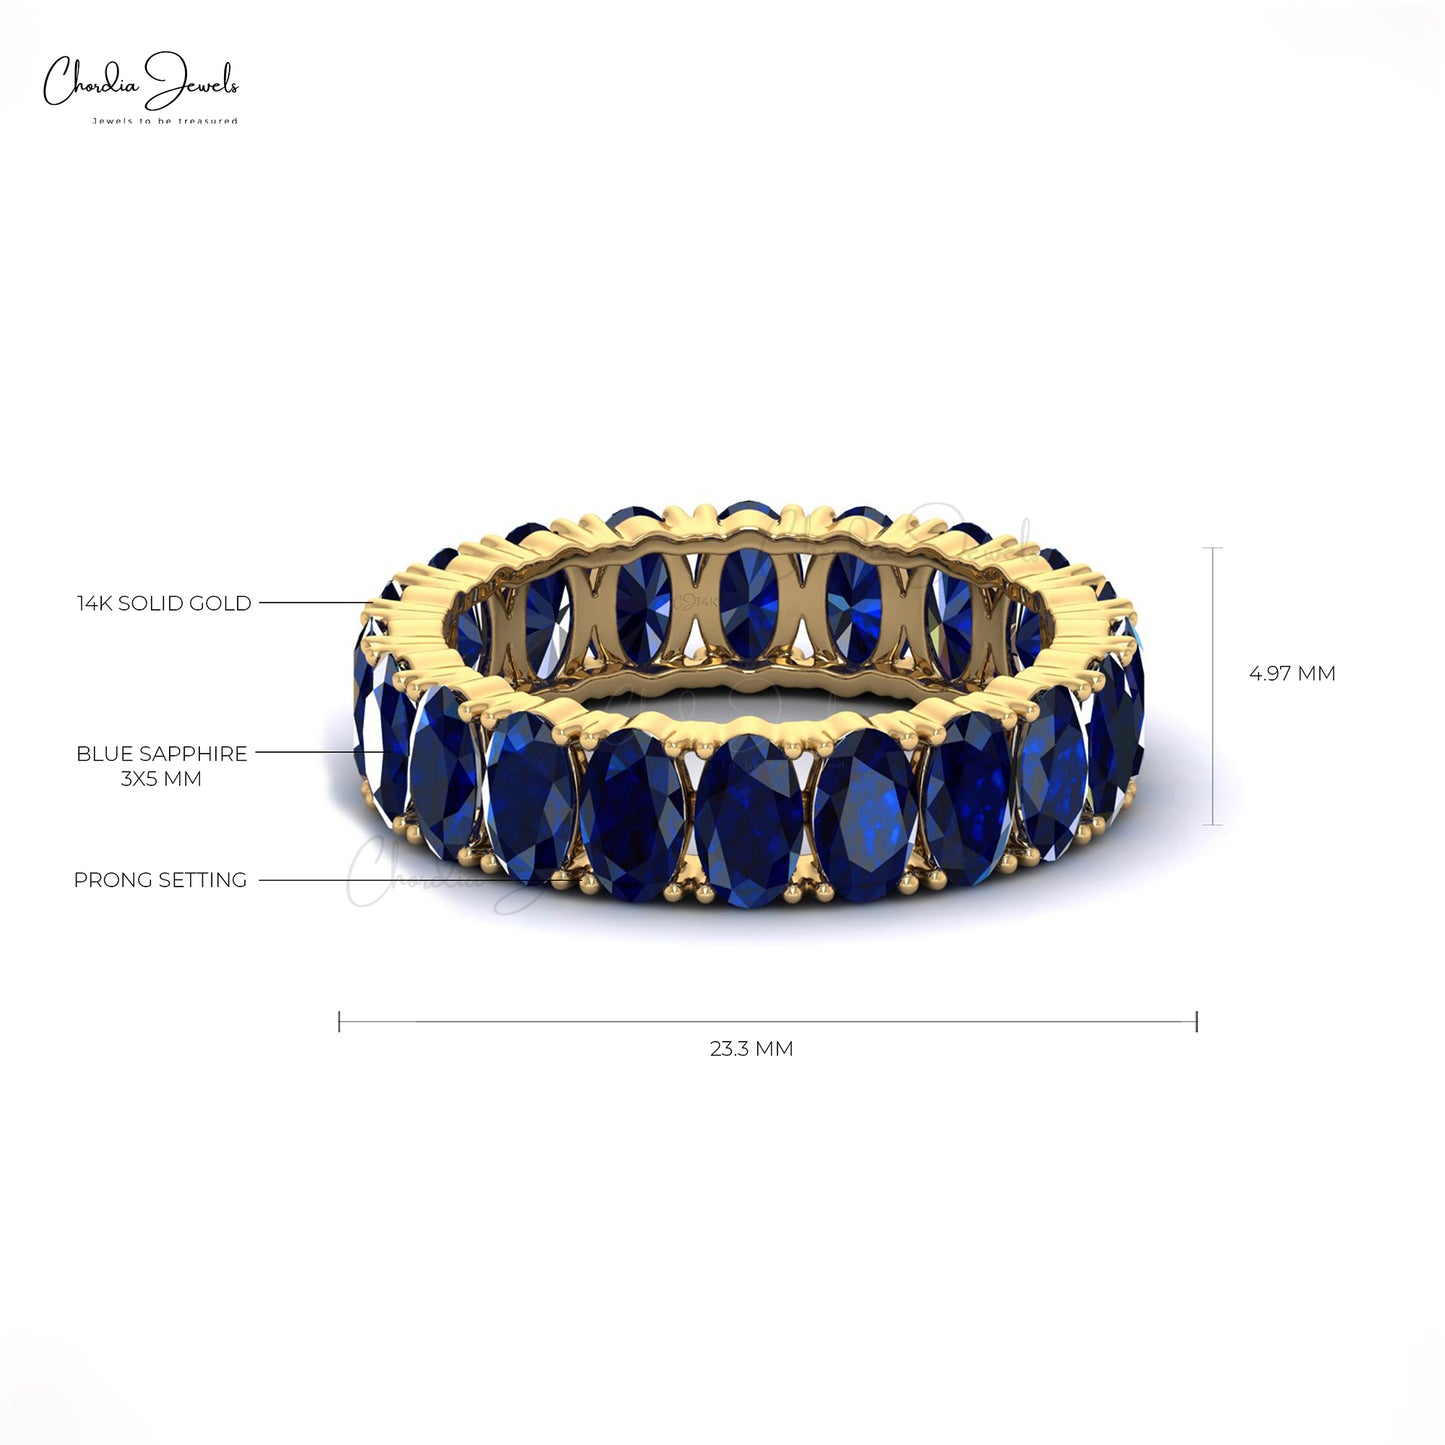 Natural Blue Sapphire Eternity Band 5x3mm Oval Cut Ring Size US-5.5 14k Solid Yellow Gold Ring For Her